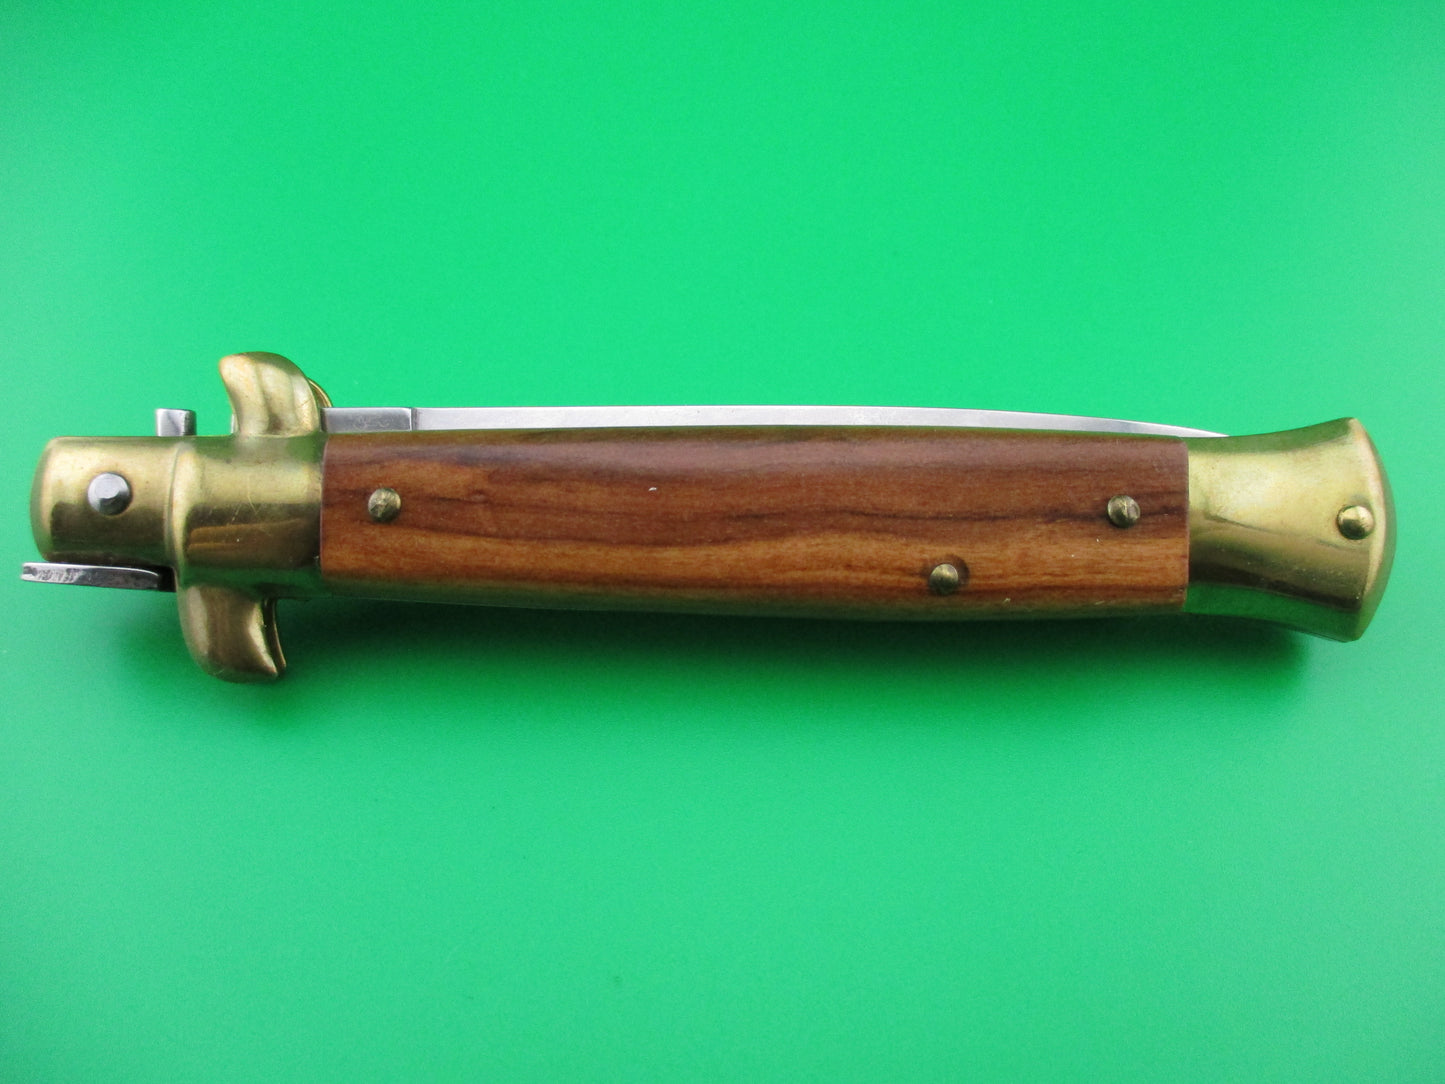 AB STILETTO ITALY 23cm Dagger grind Wood scales vintage switchblade knife